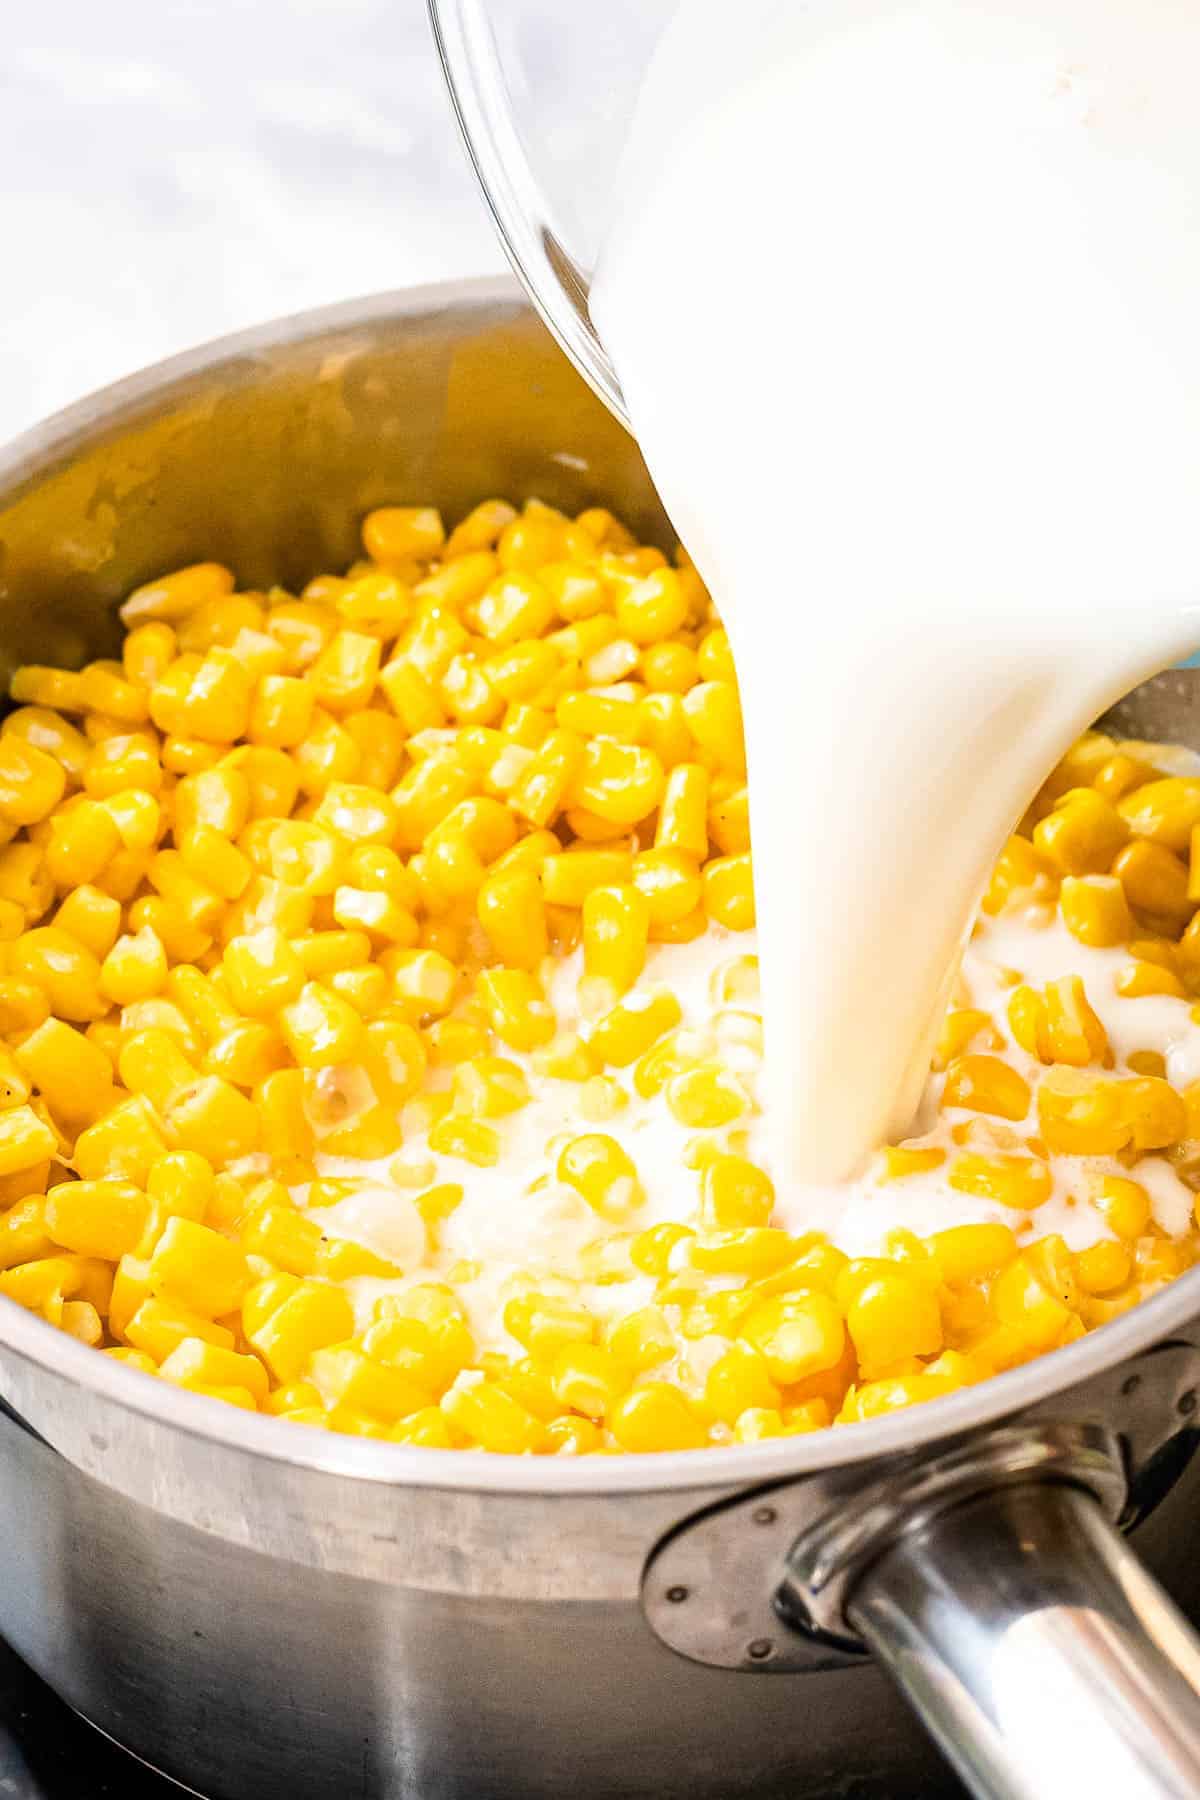 Milk being poured into a saucepan with corn